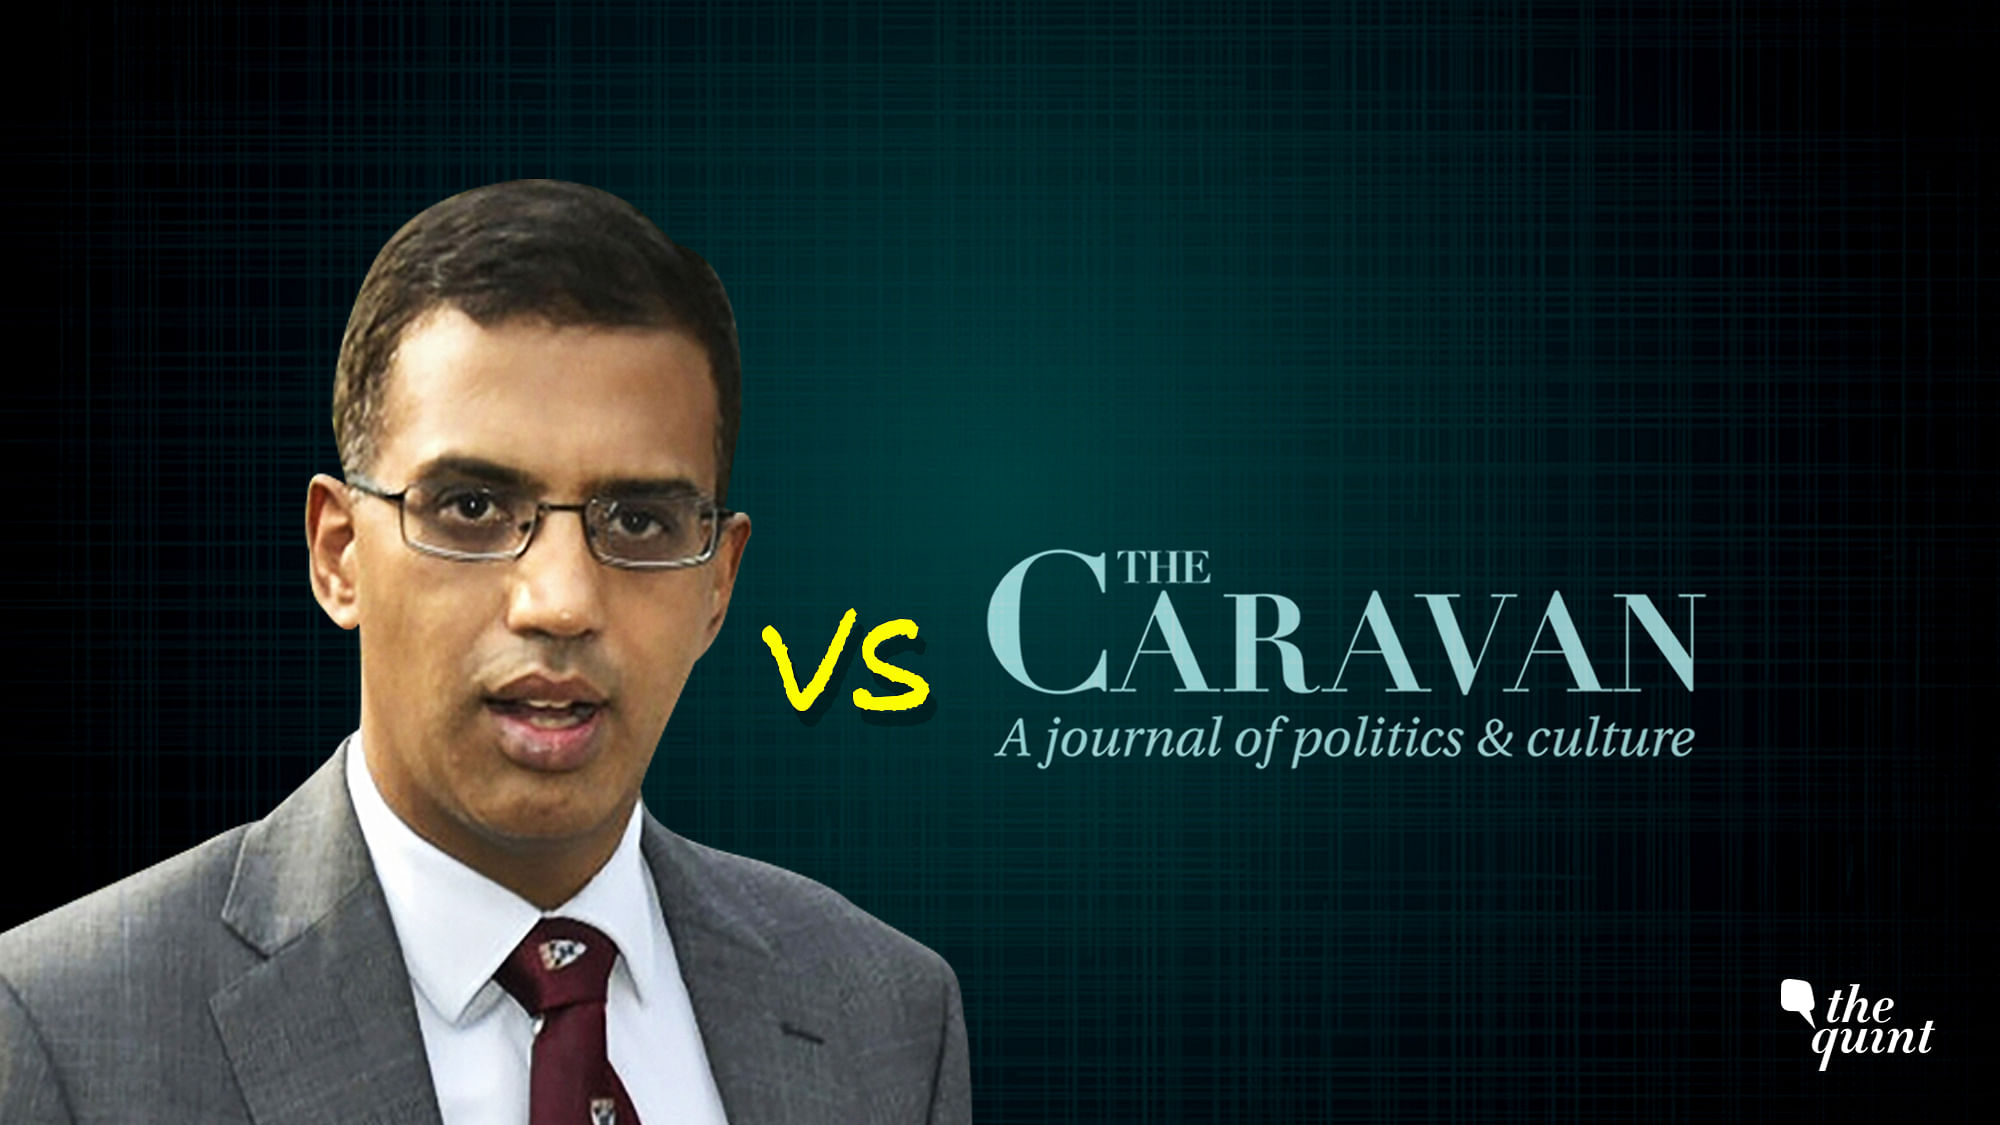 Vivek Doval has said that he has been “deliberately maligned and defamed” by <i>The Caravan</i> in the article in question.&nbsp;